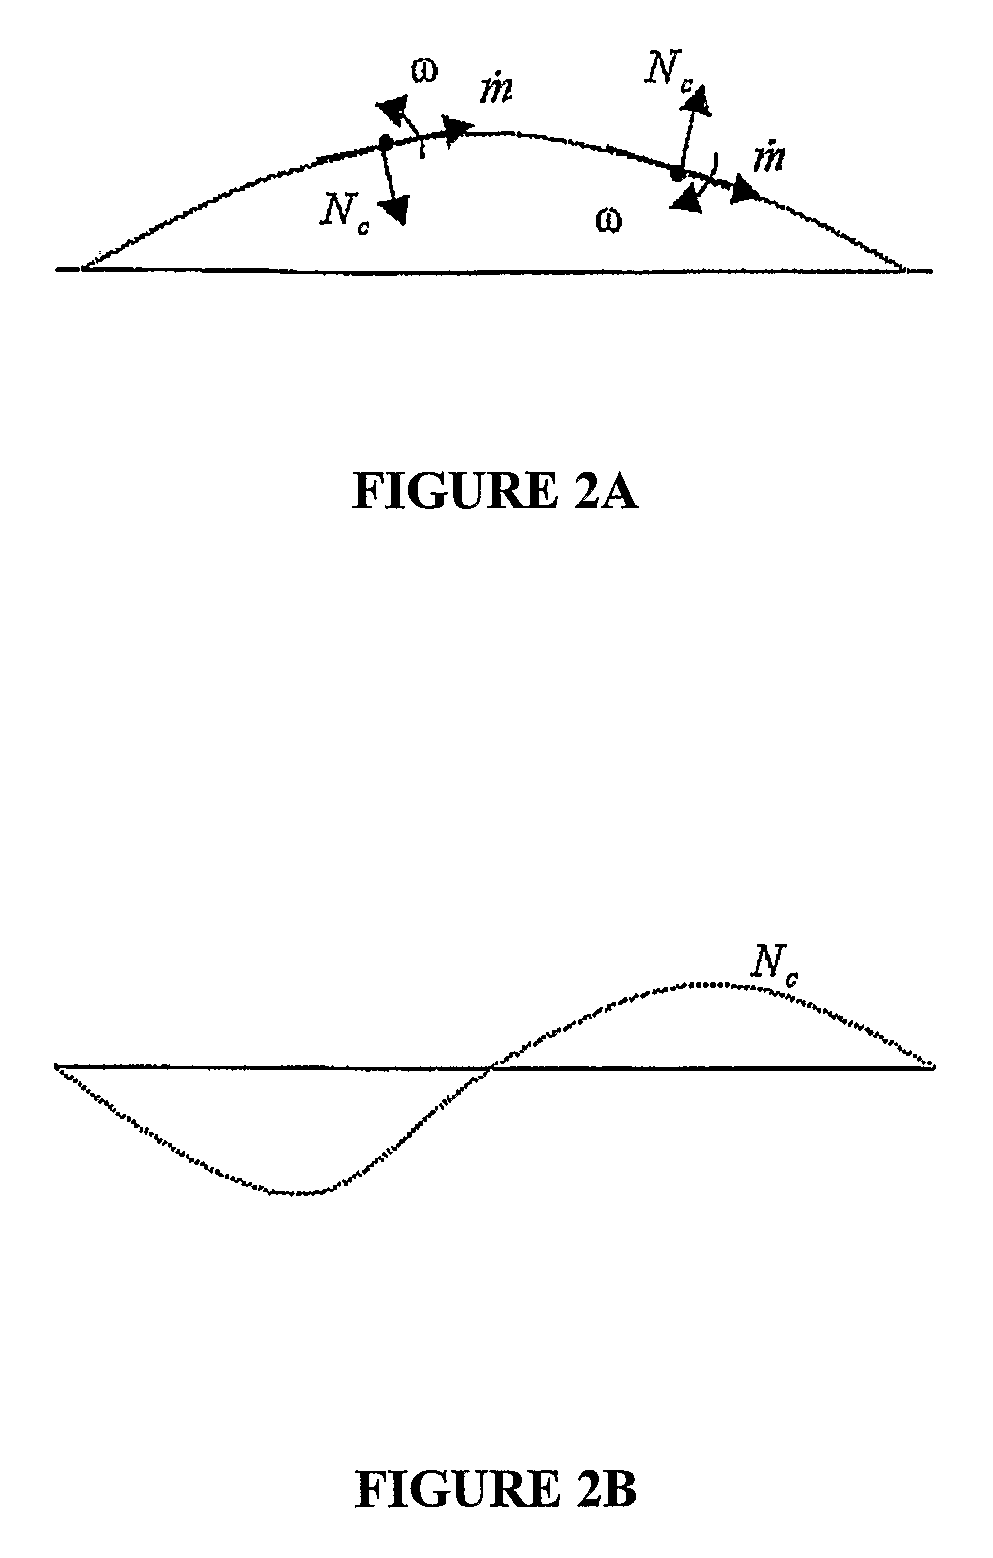 Method and apparatus for measuring flow through a conduit by measuring the Coriolis coupling between two vibration modes